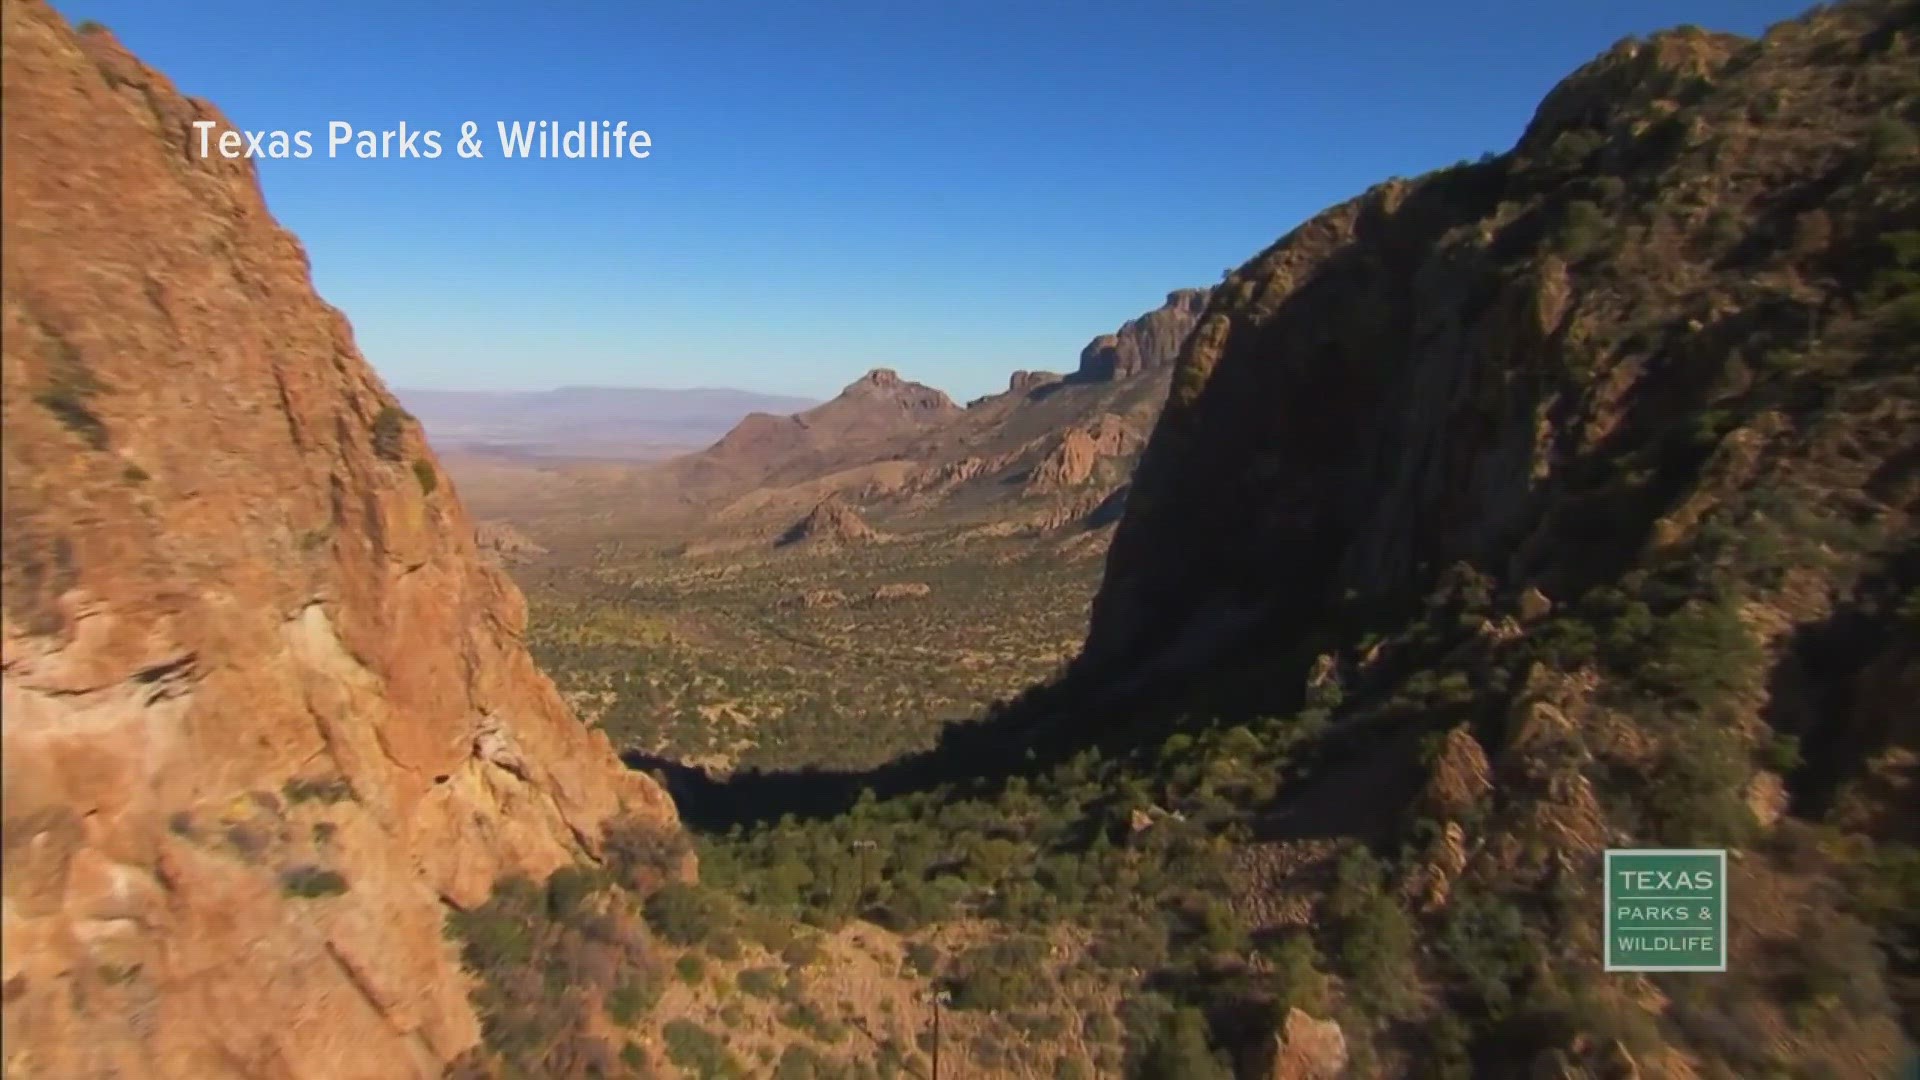 This week we celebrate Big Bend, Guadalupe Mountains and Carlsbad Caverns National Parks.